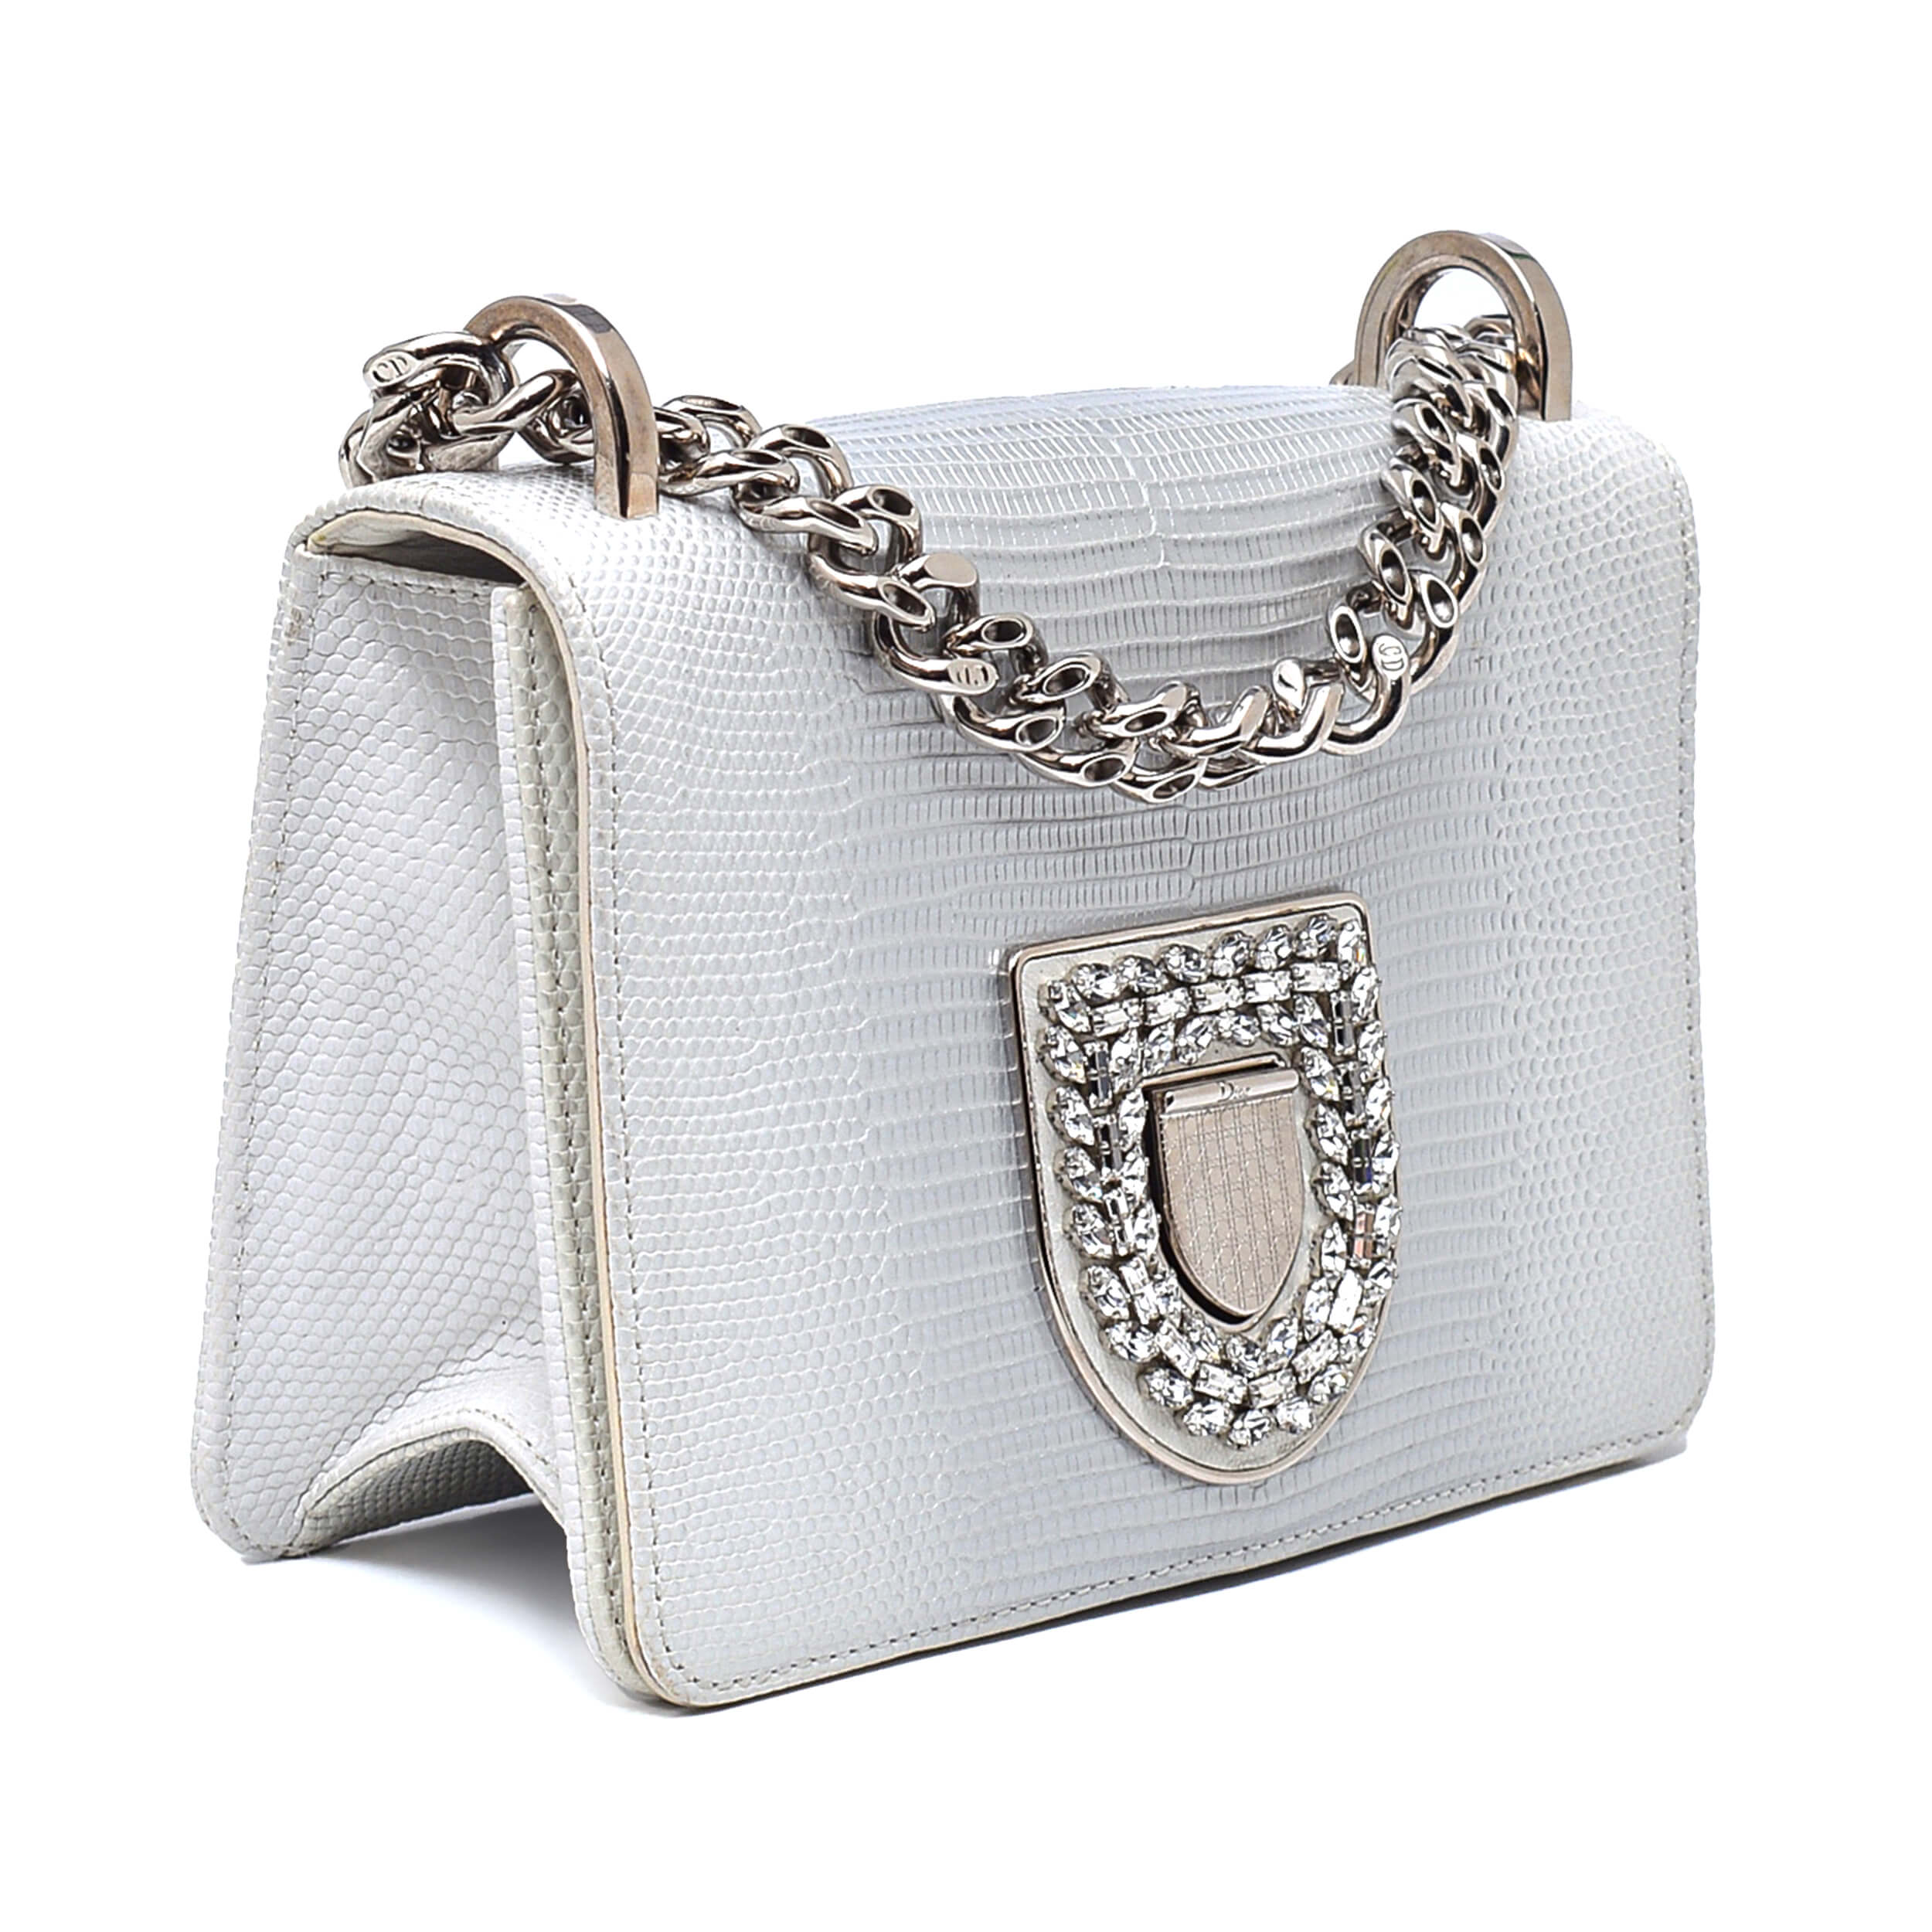 Christian Dior - White Lizard Embossed Leather Small Diorama Bag